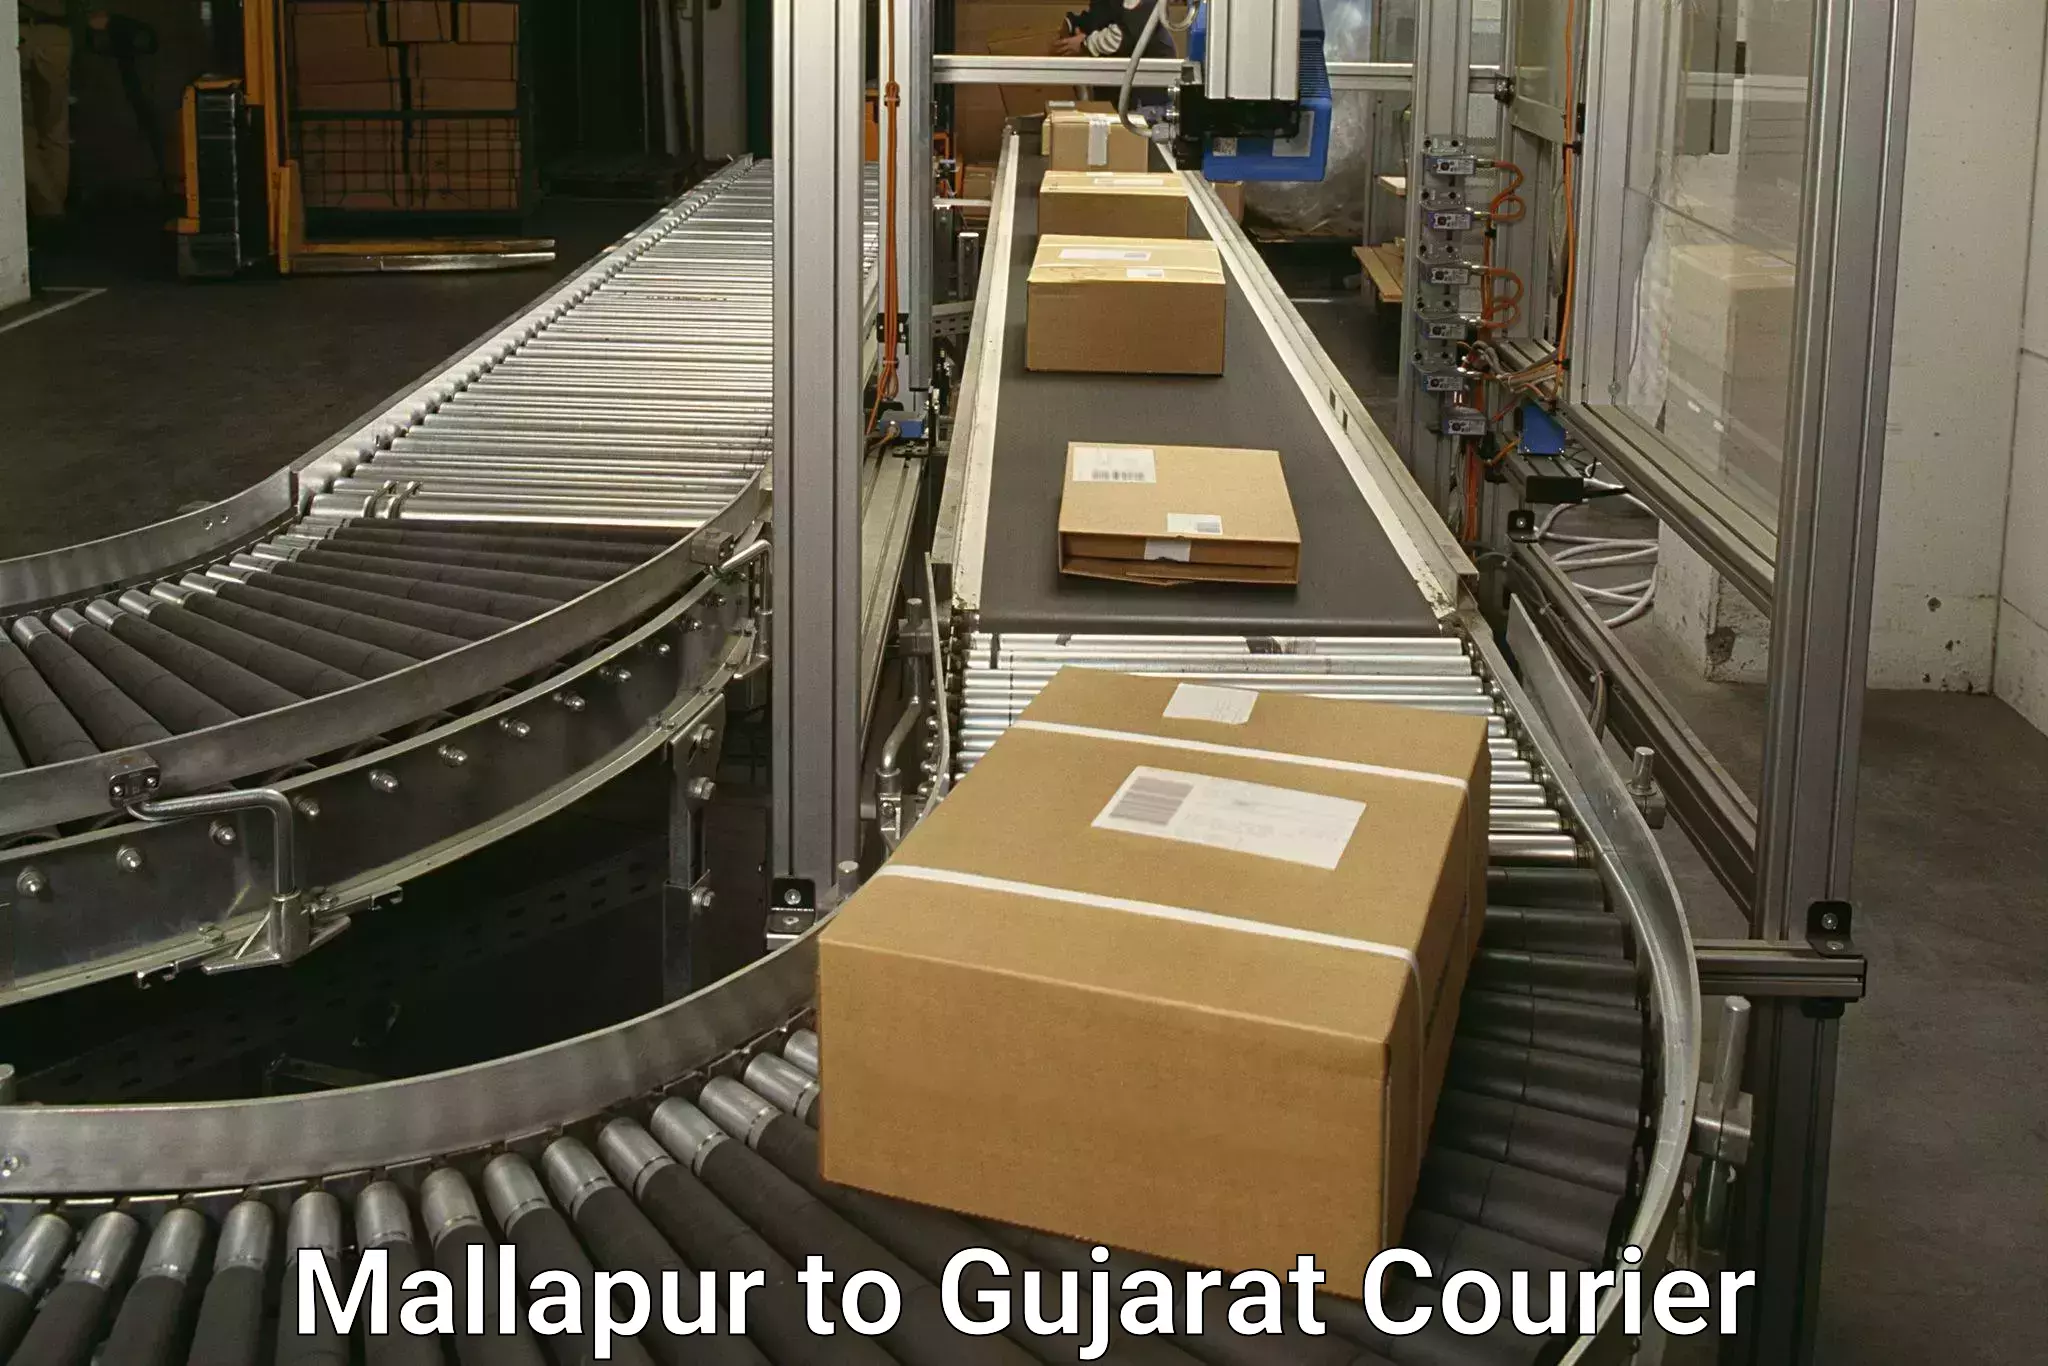 Advanced shipping technology Mallapur to Anand